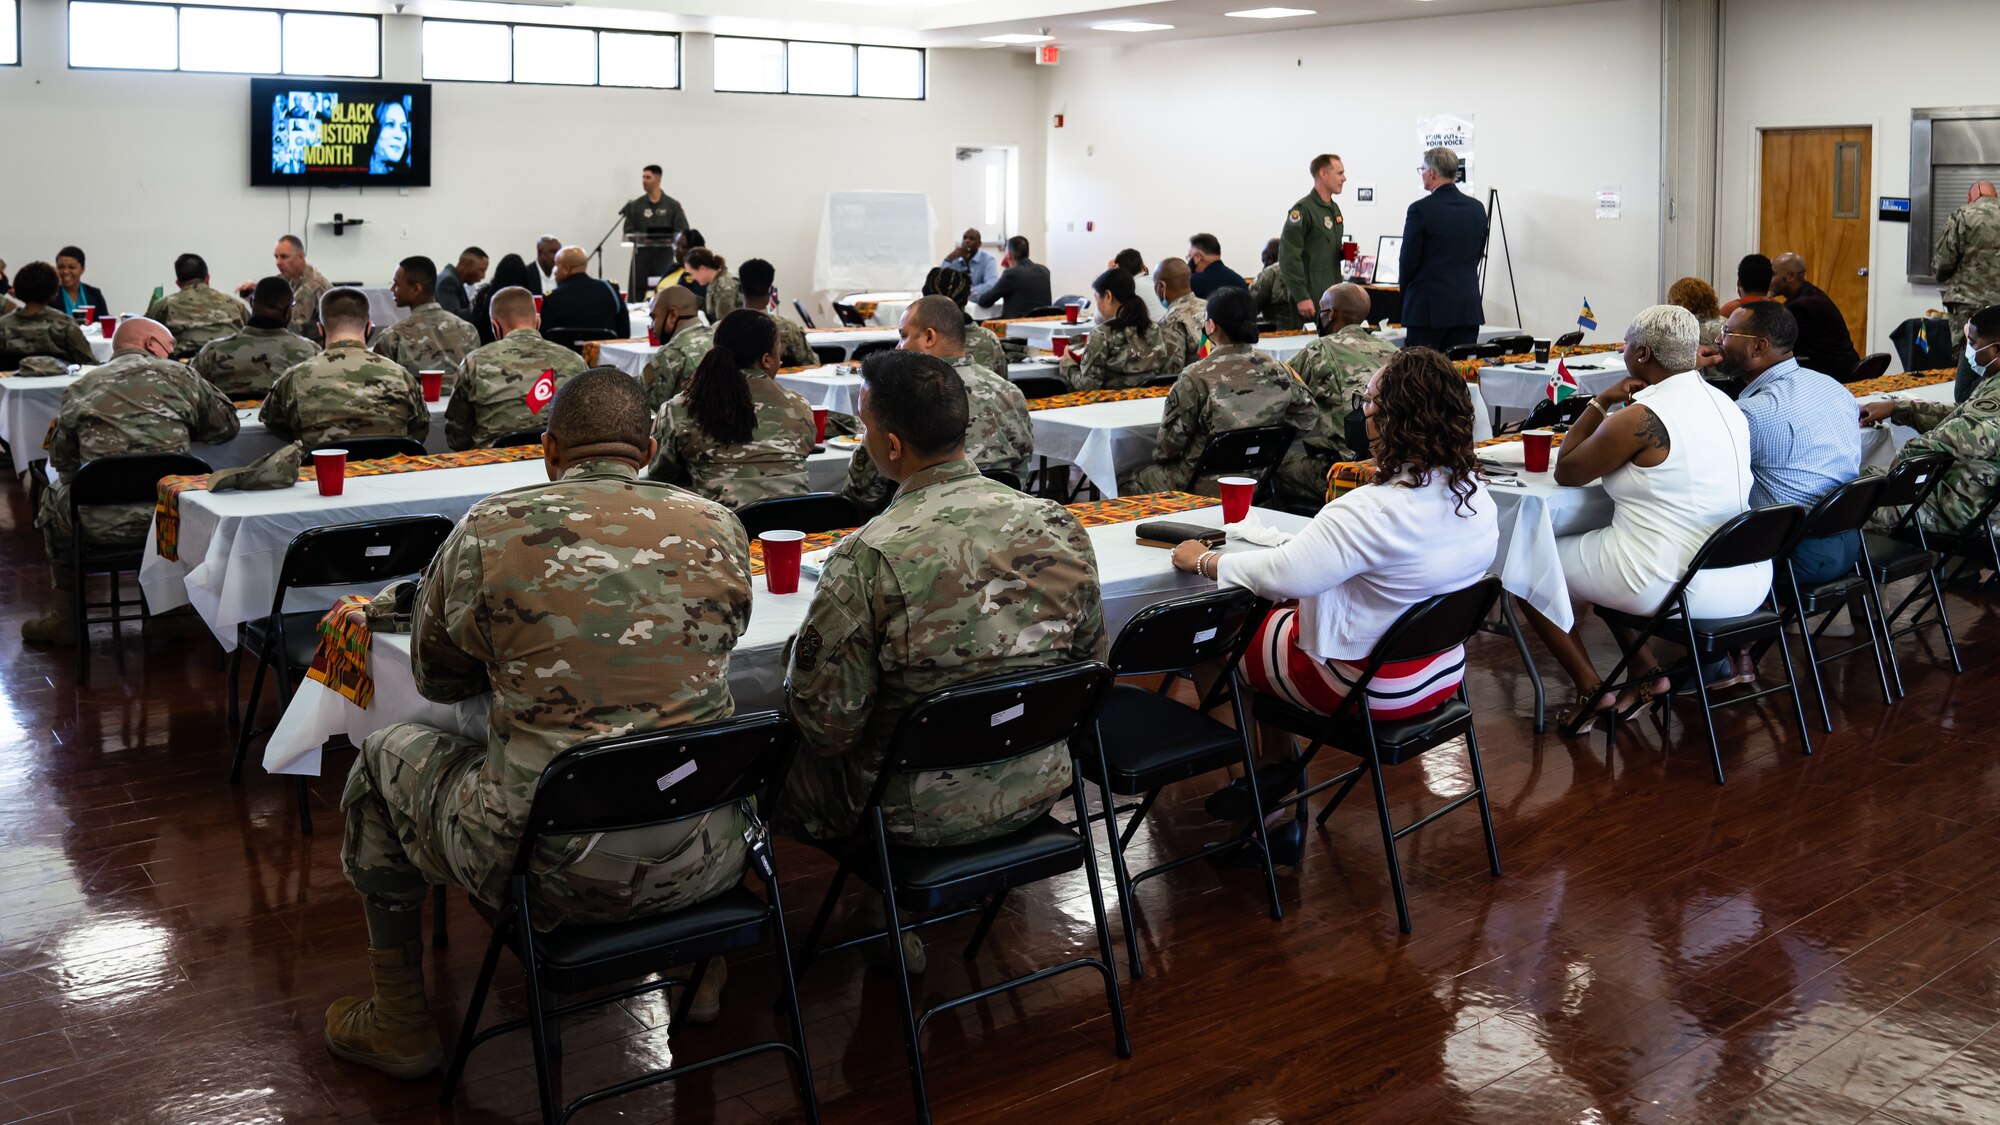 Members celebrate Black History Month at a commemorative luncheon at MacDill Air Force Base, Florida, Feb. 24, 2022. Black History Month is an annual celebration of achievements made by African Americans throughout U.S. history.